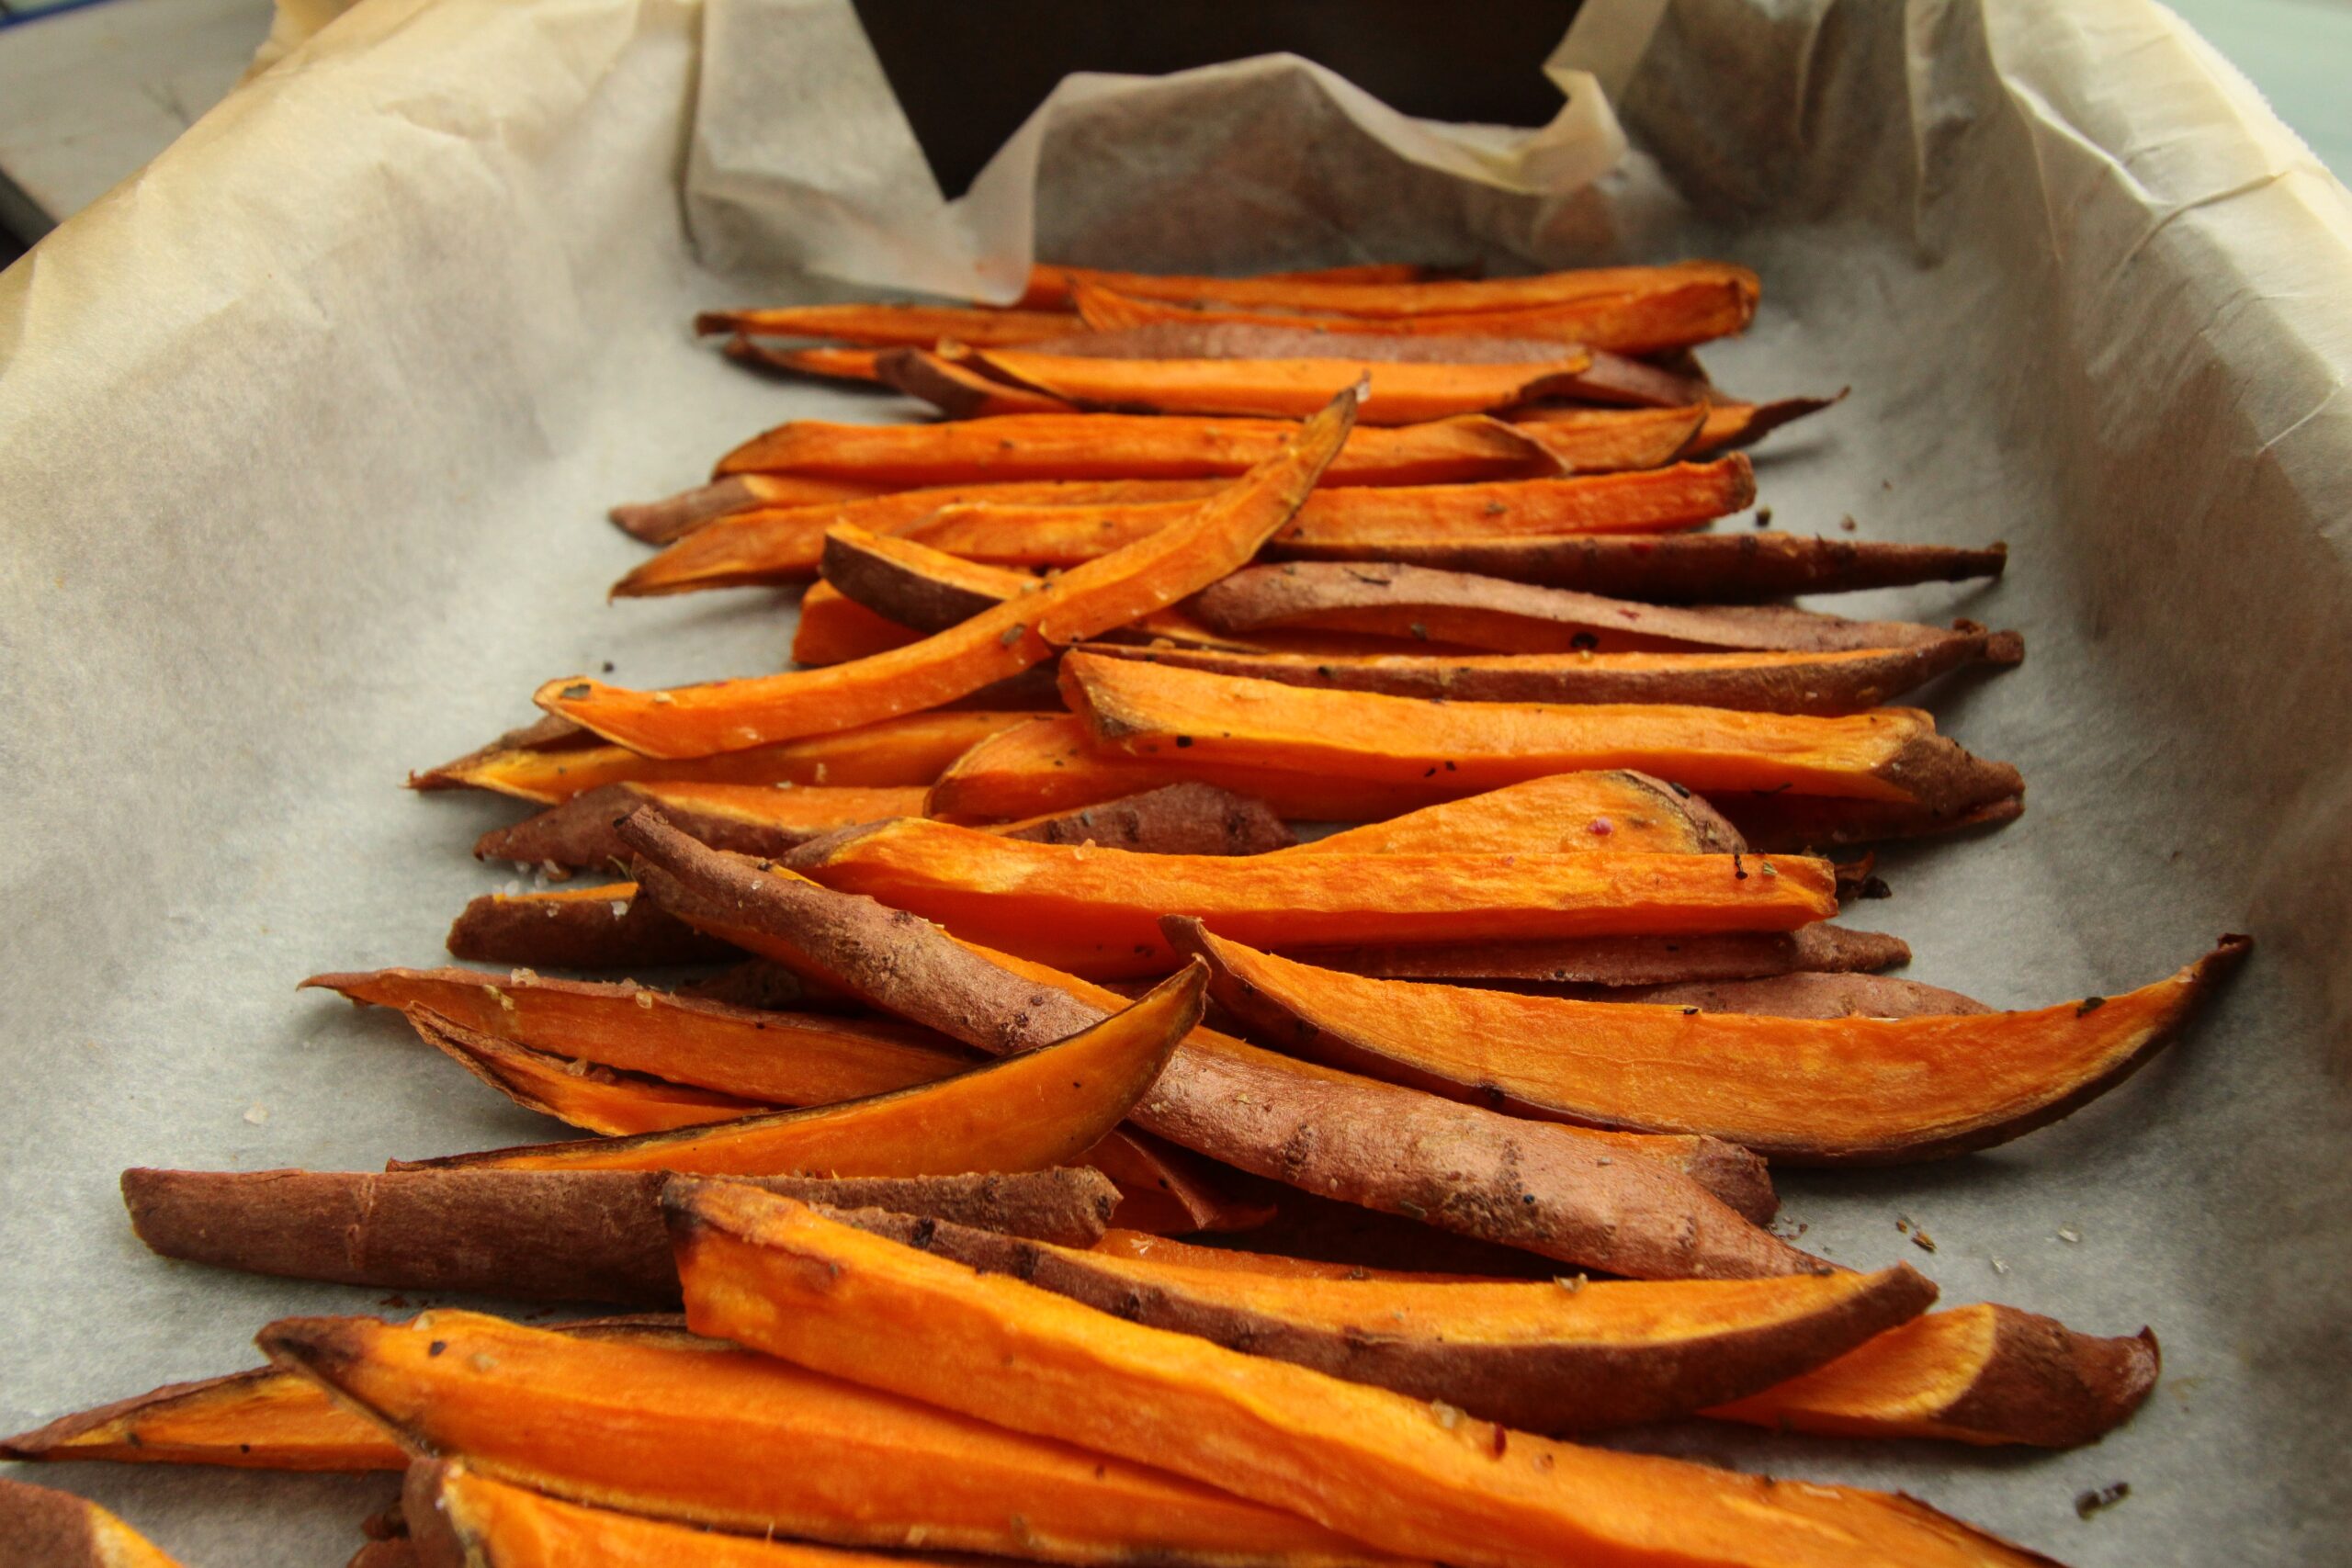 a photo of sweet potato fries and how to speed up your metabolism after 40